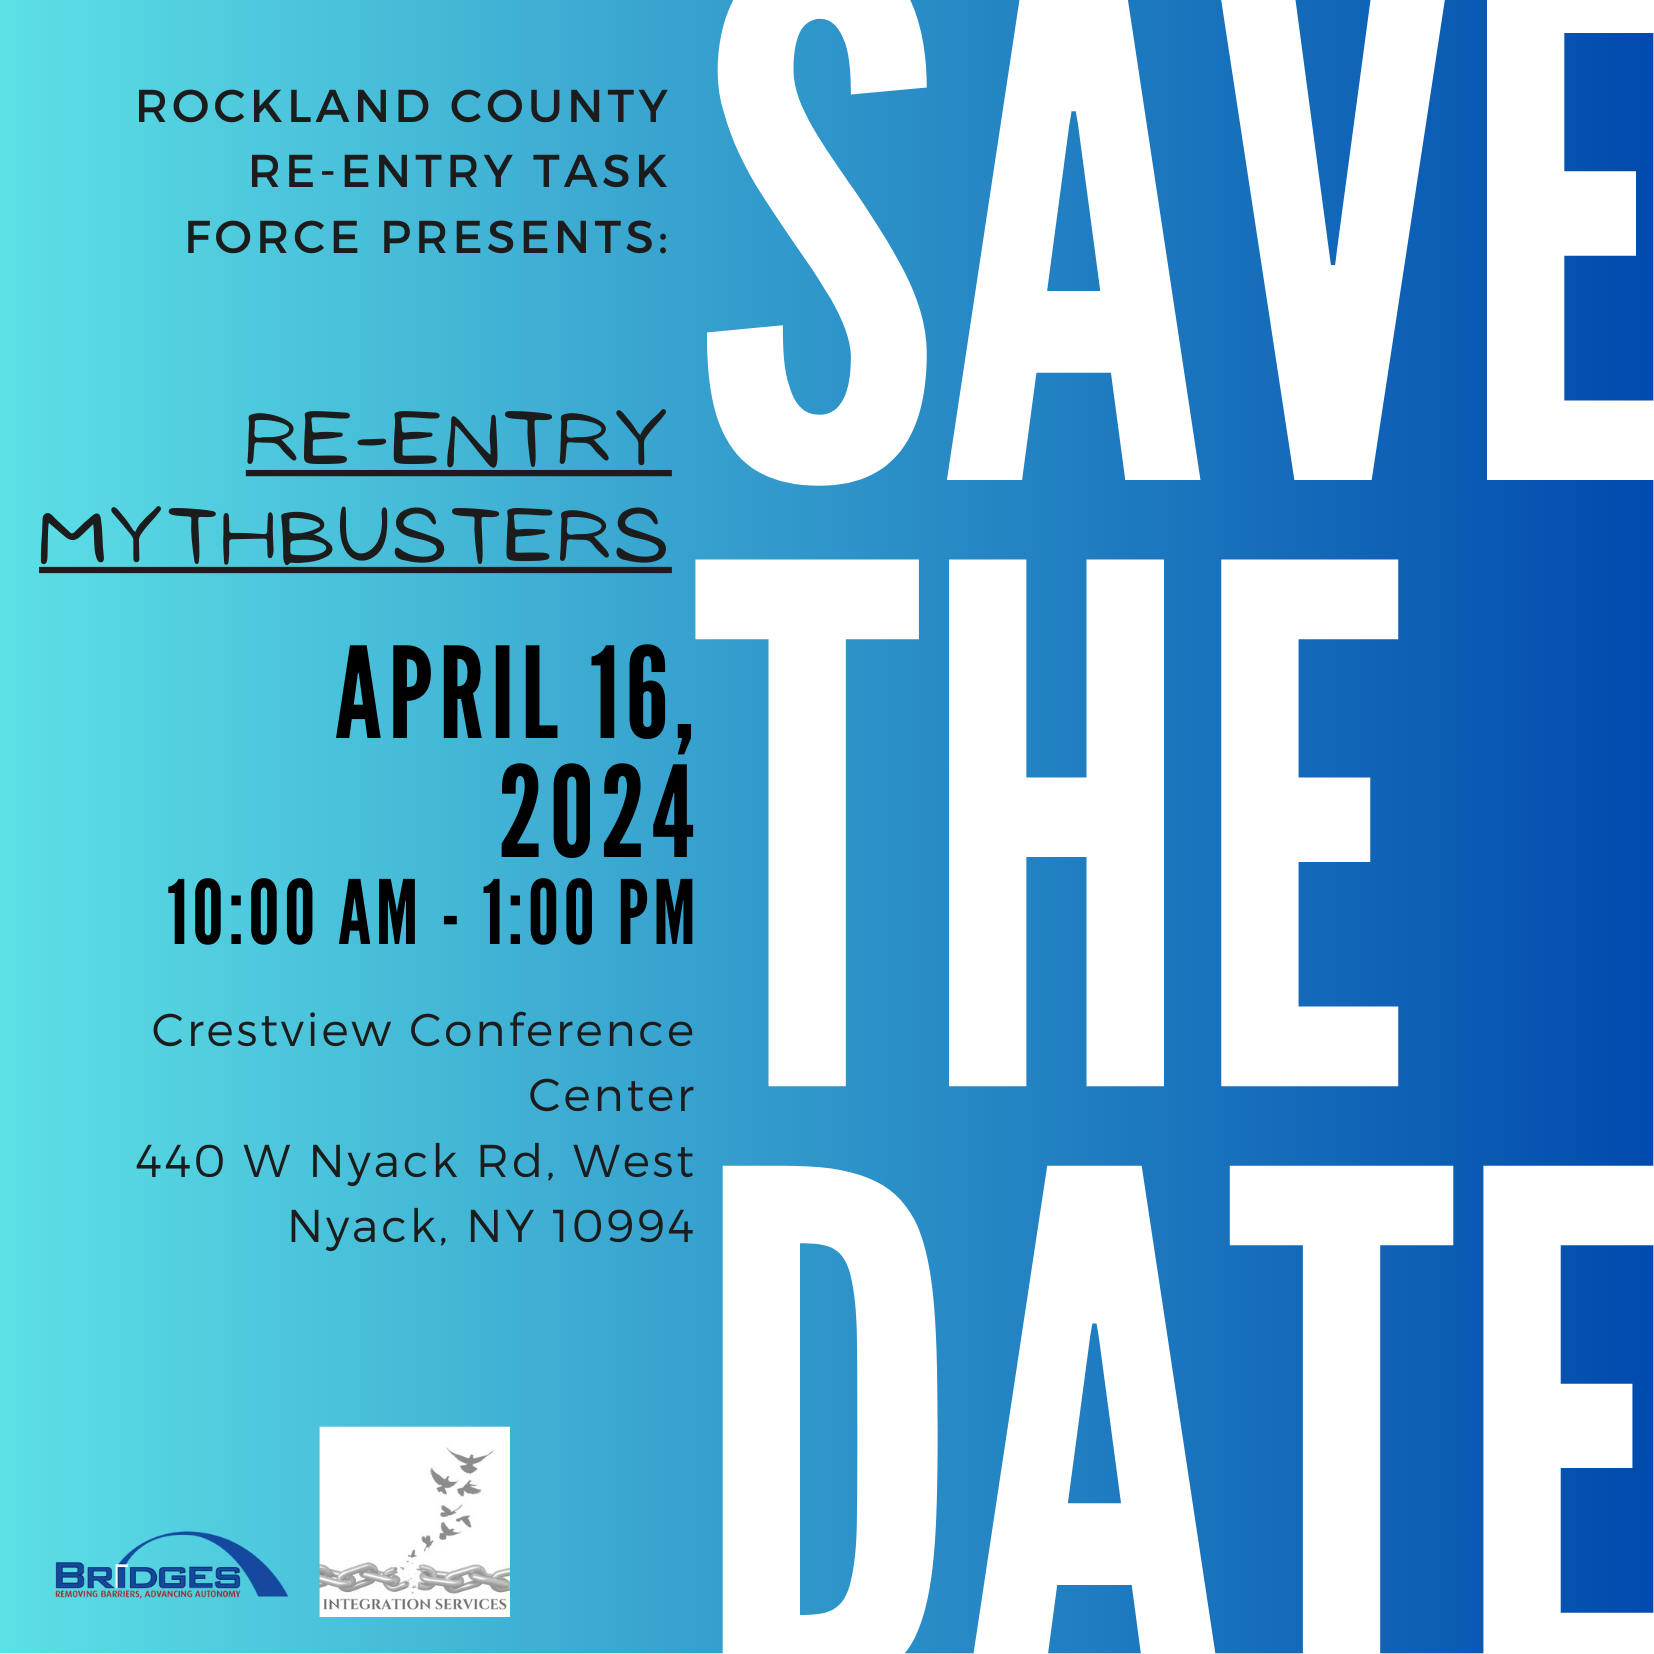 Rockland County Re-entry Task Force Presents: Re-Entry Mythbusters. April 16, 2024 from 10 A-M to 1 P-M. Crestview Conference Center West Nyack Road, West Nyack, New York, 10994.